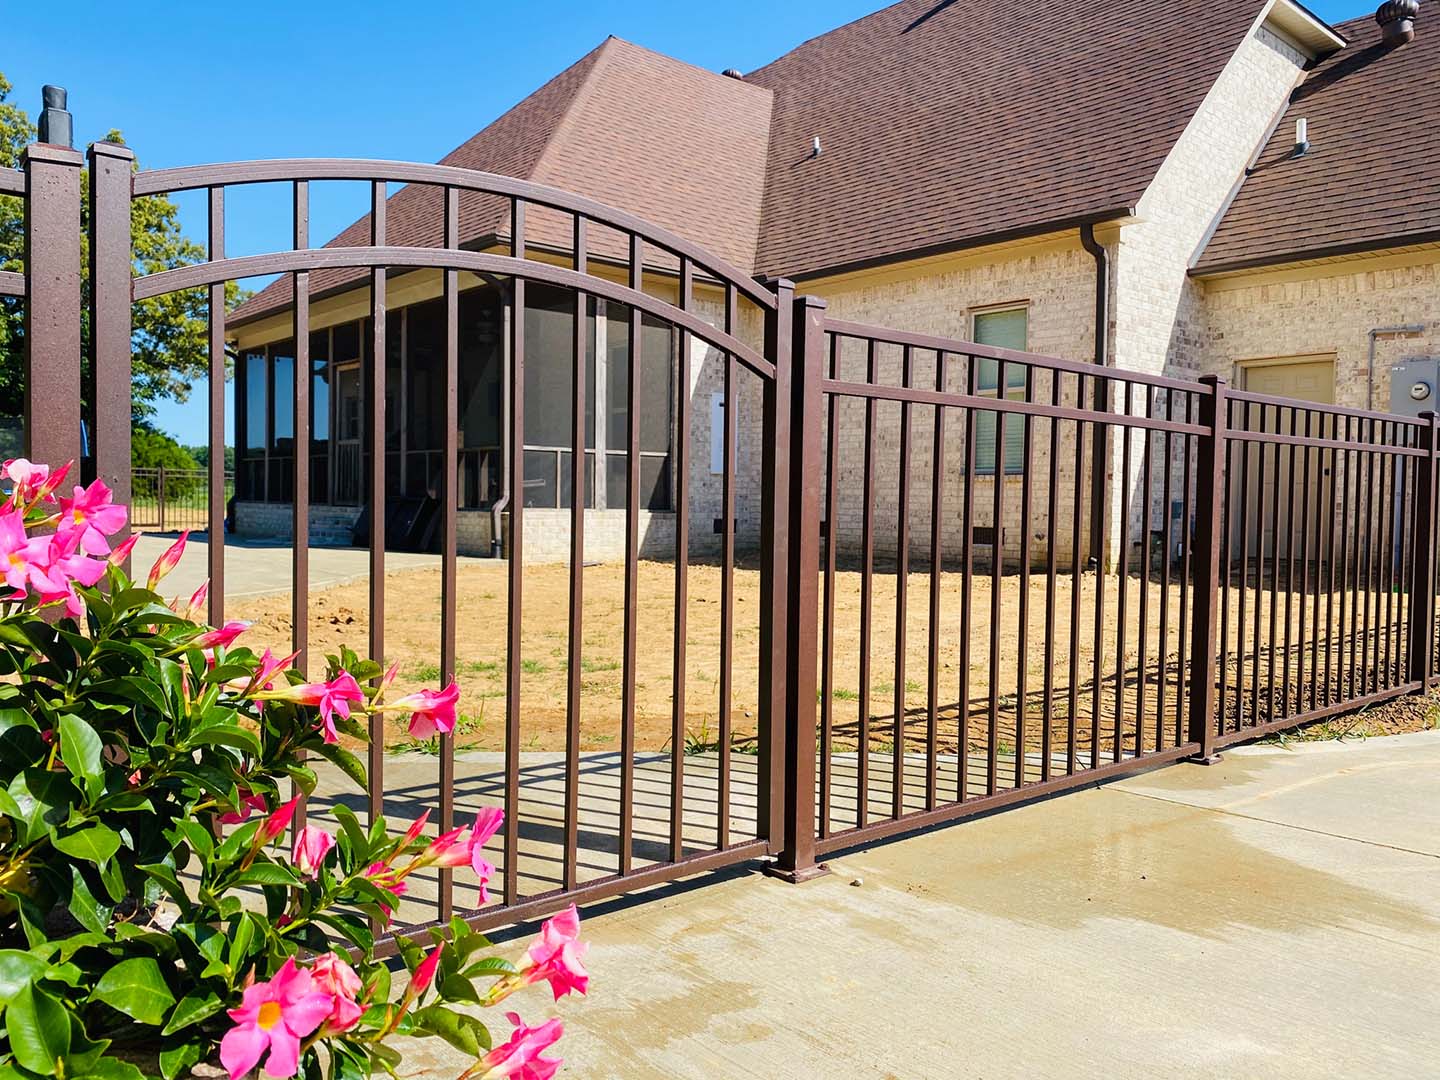 West Tennessee Brown Aluminum Fence